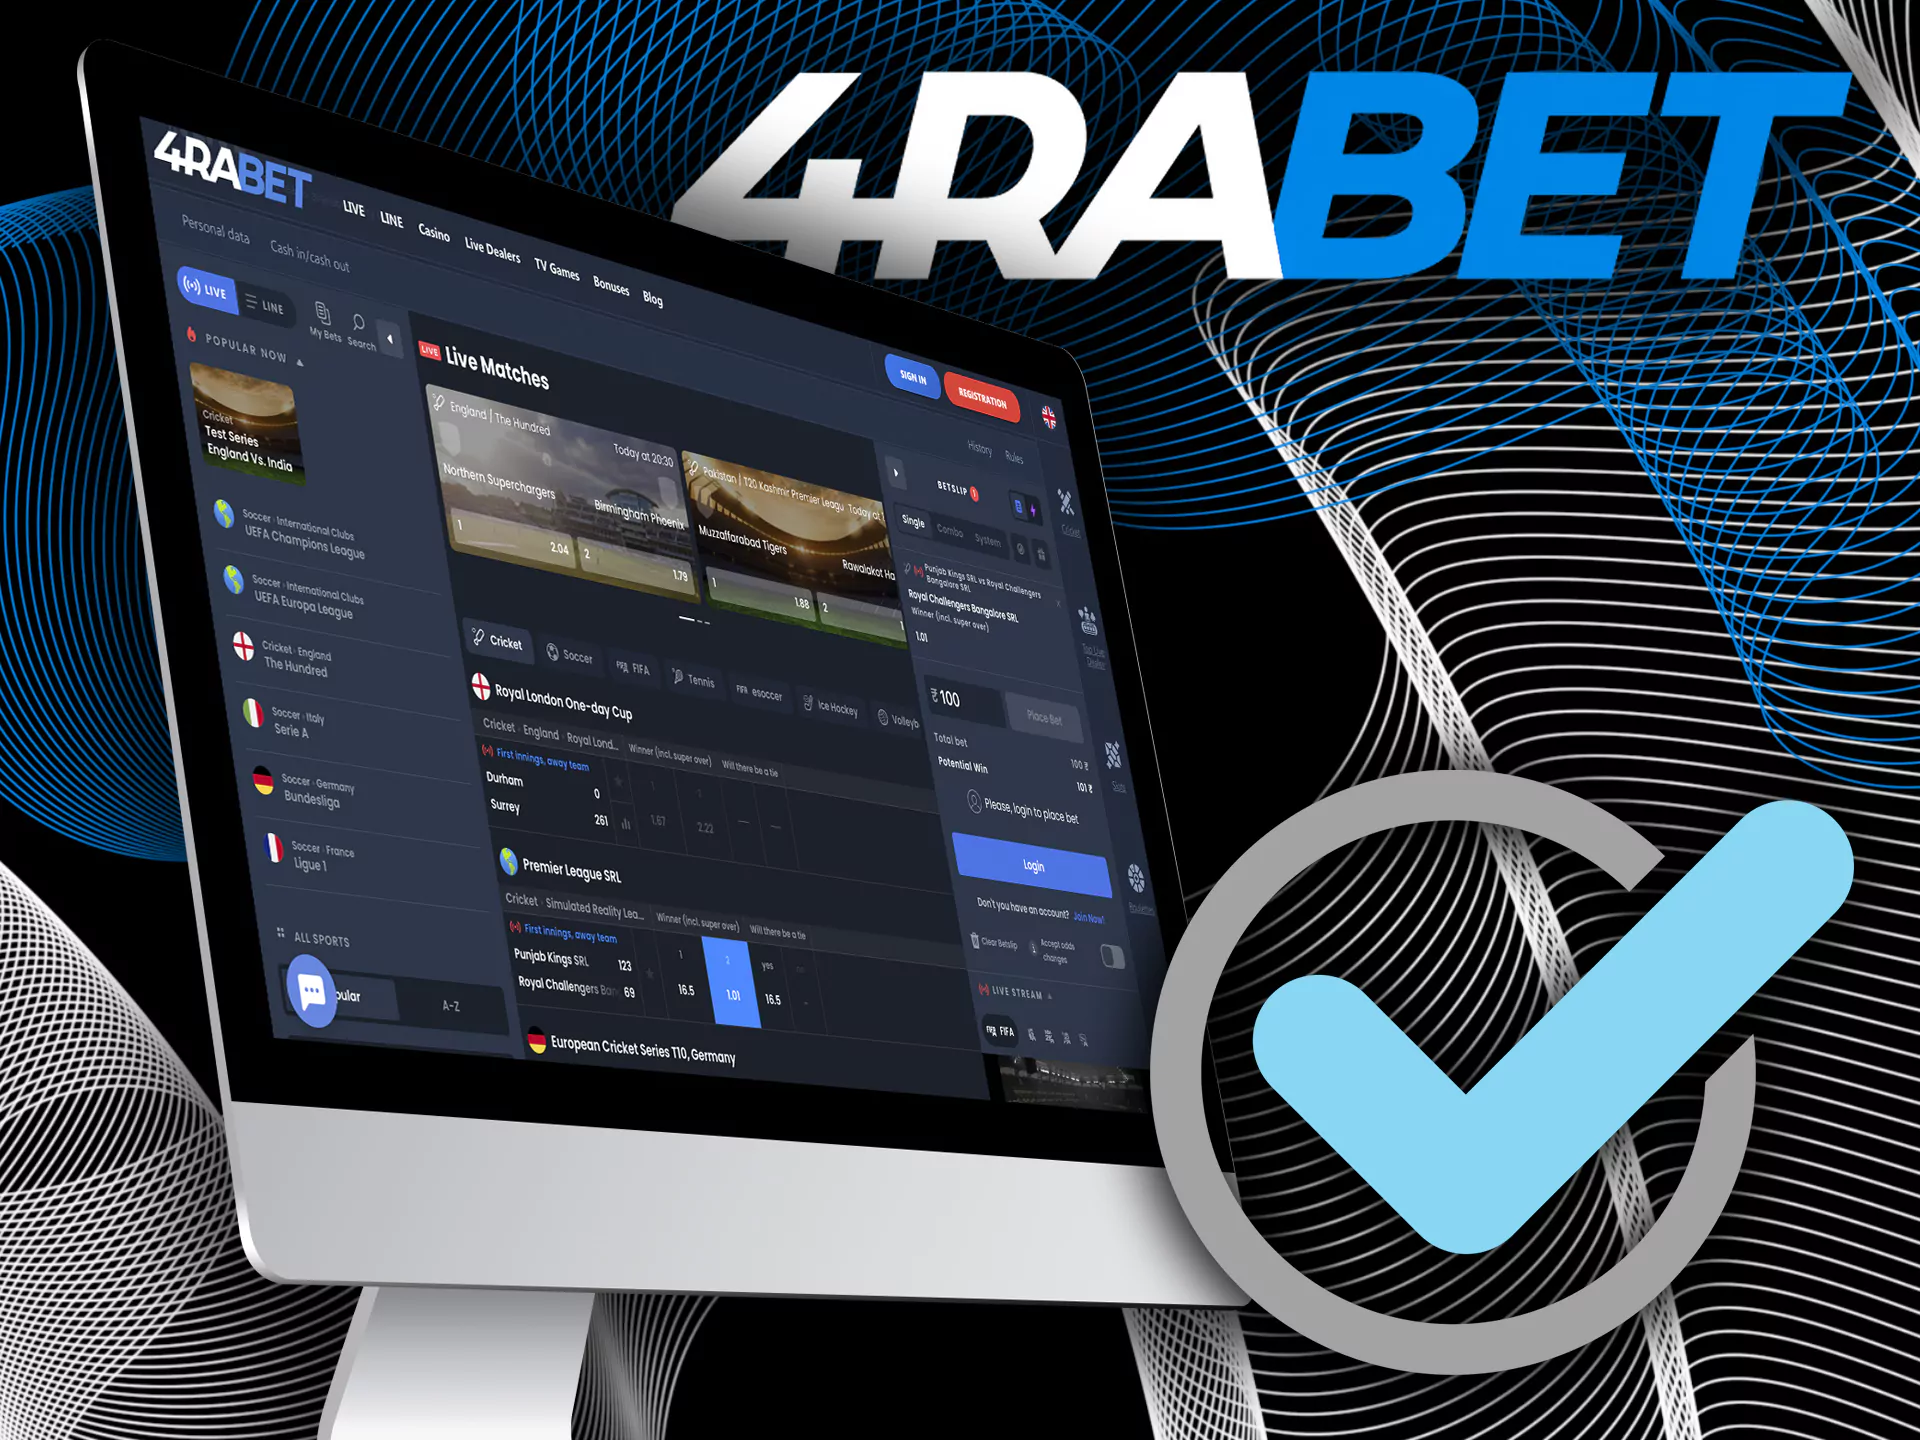 Verify your 4rabet account to withdraw money.